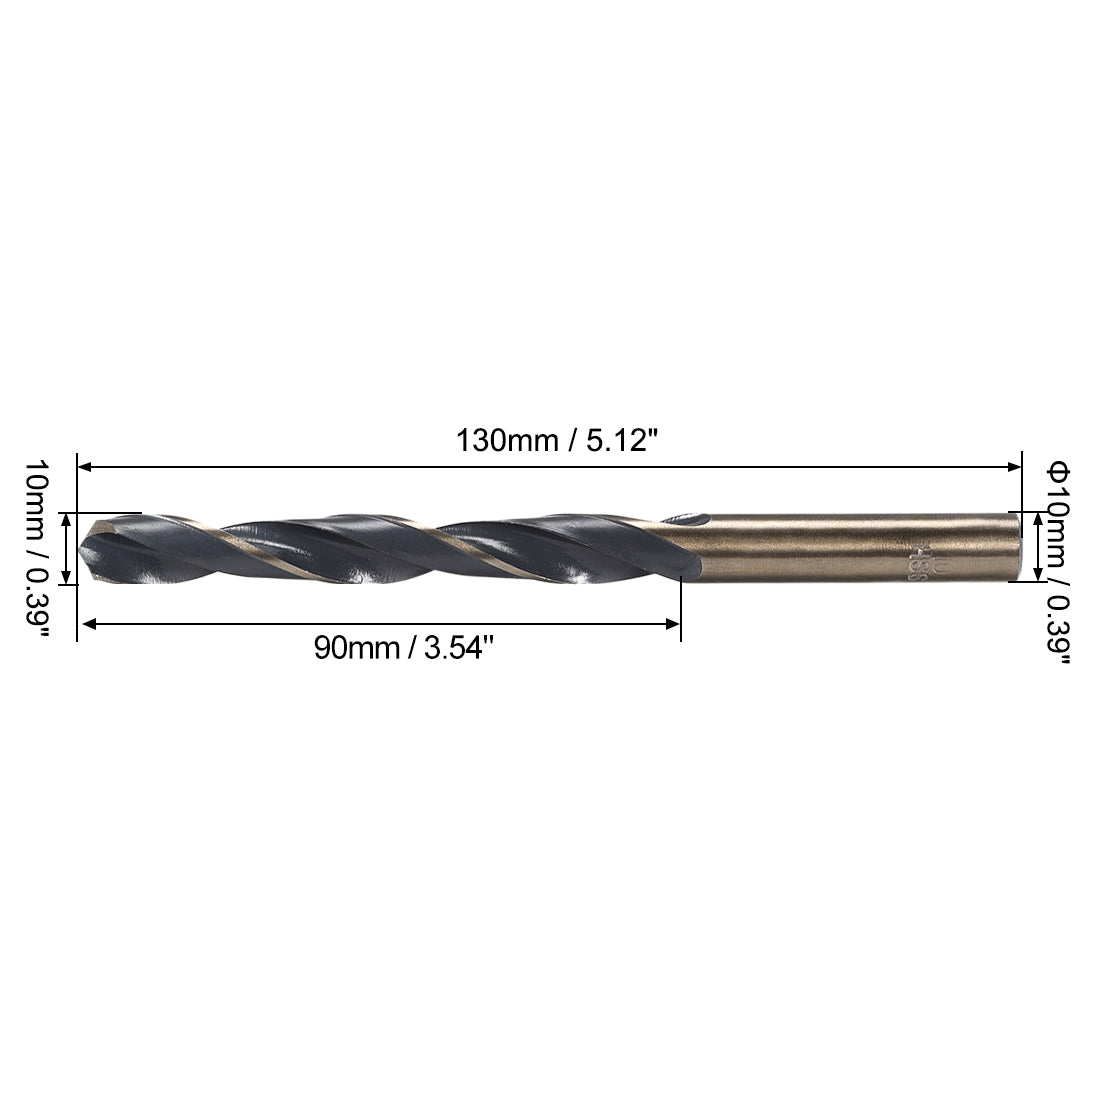 uxcell Uxcell Straight Shank Twist Drill Bits 10mm HSS 4341 with 10mm Shank